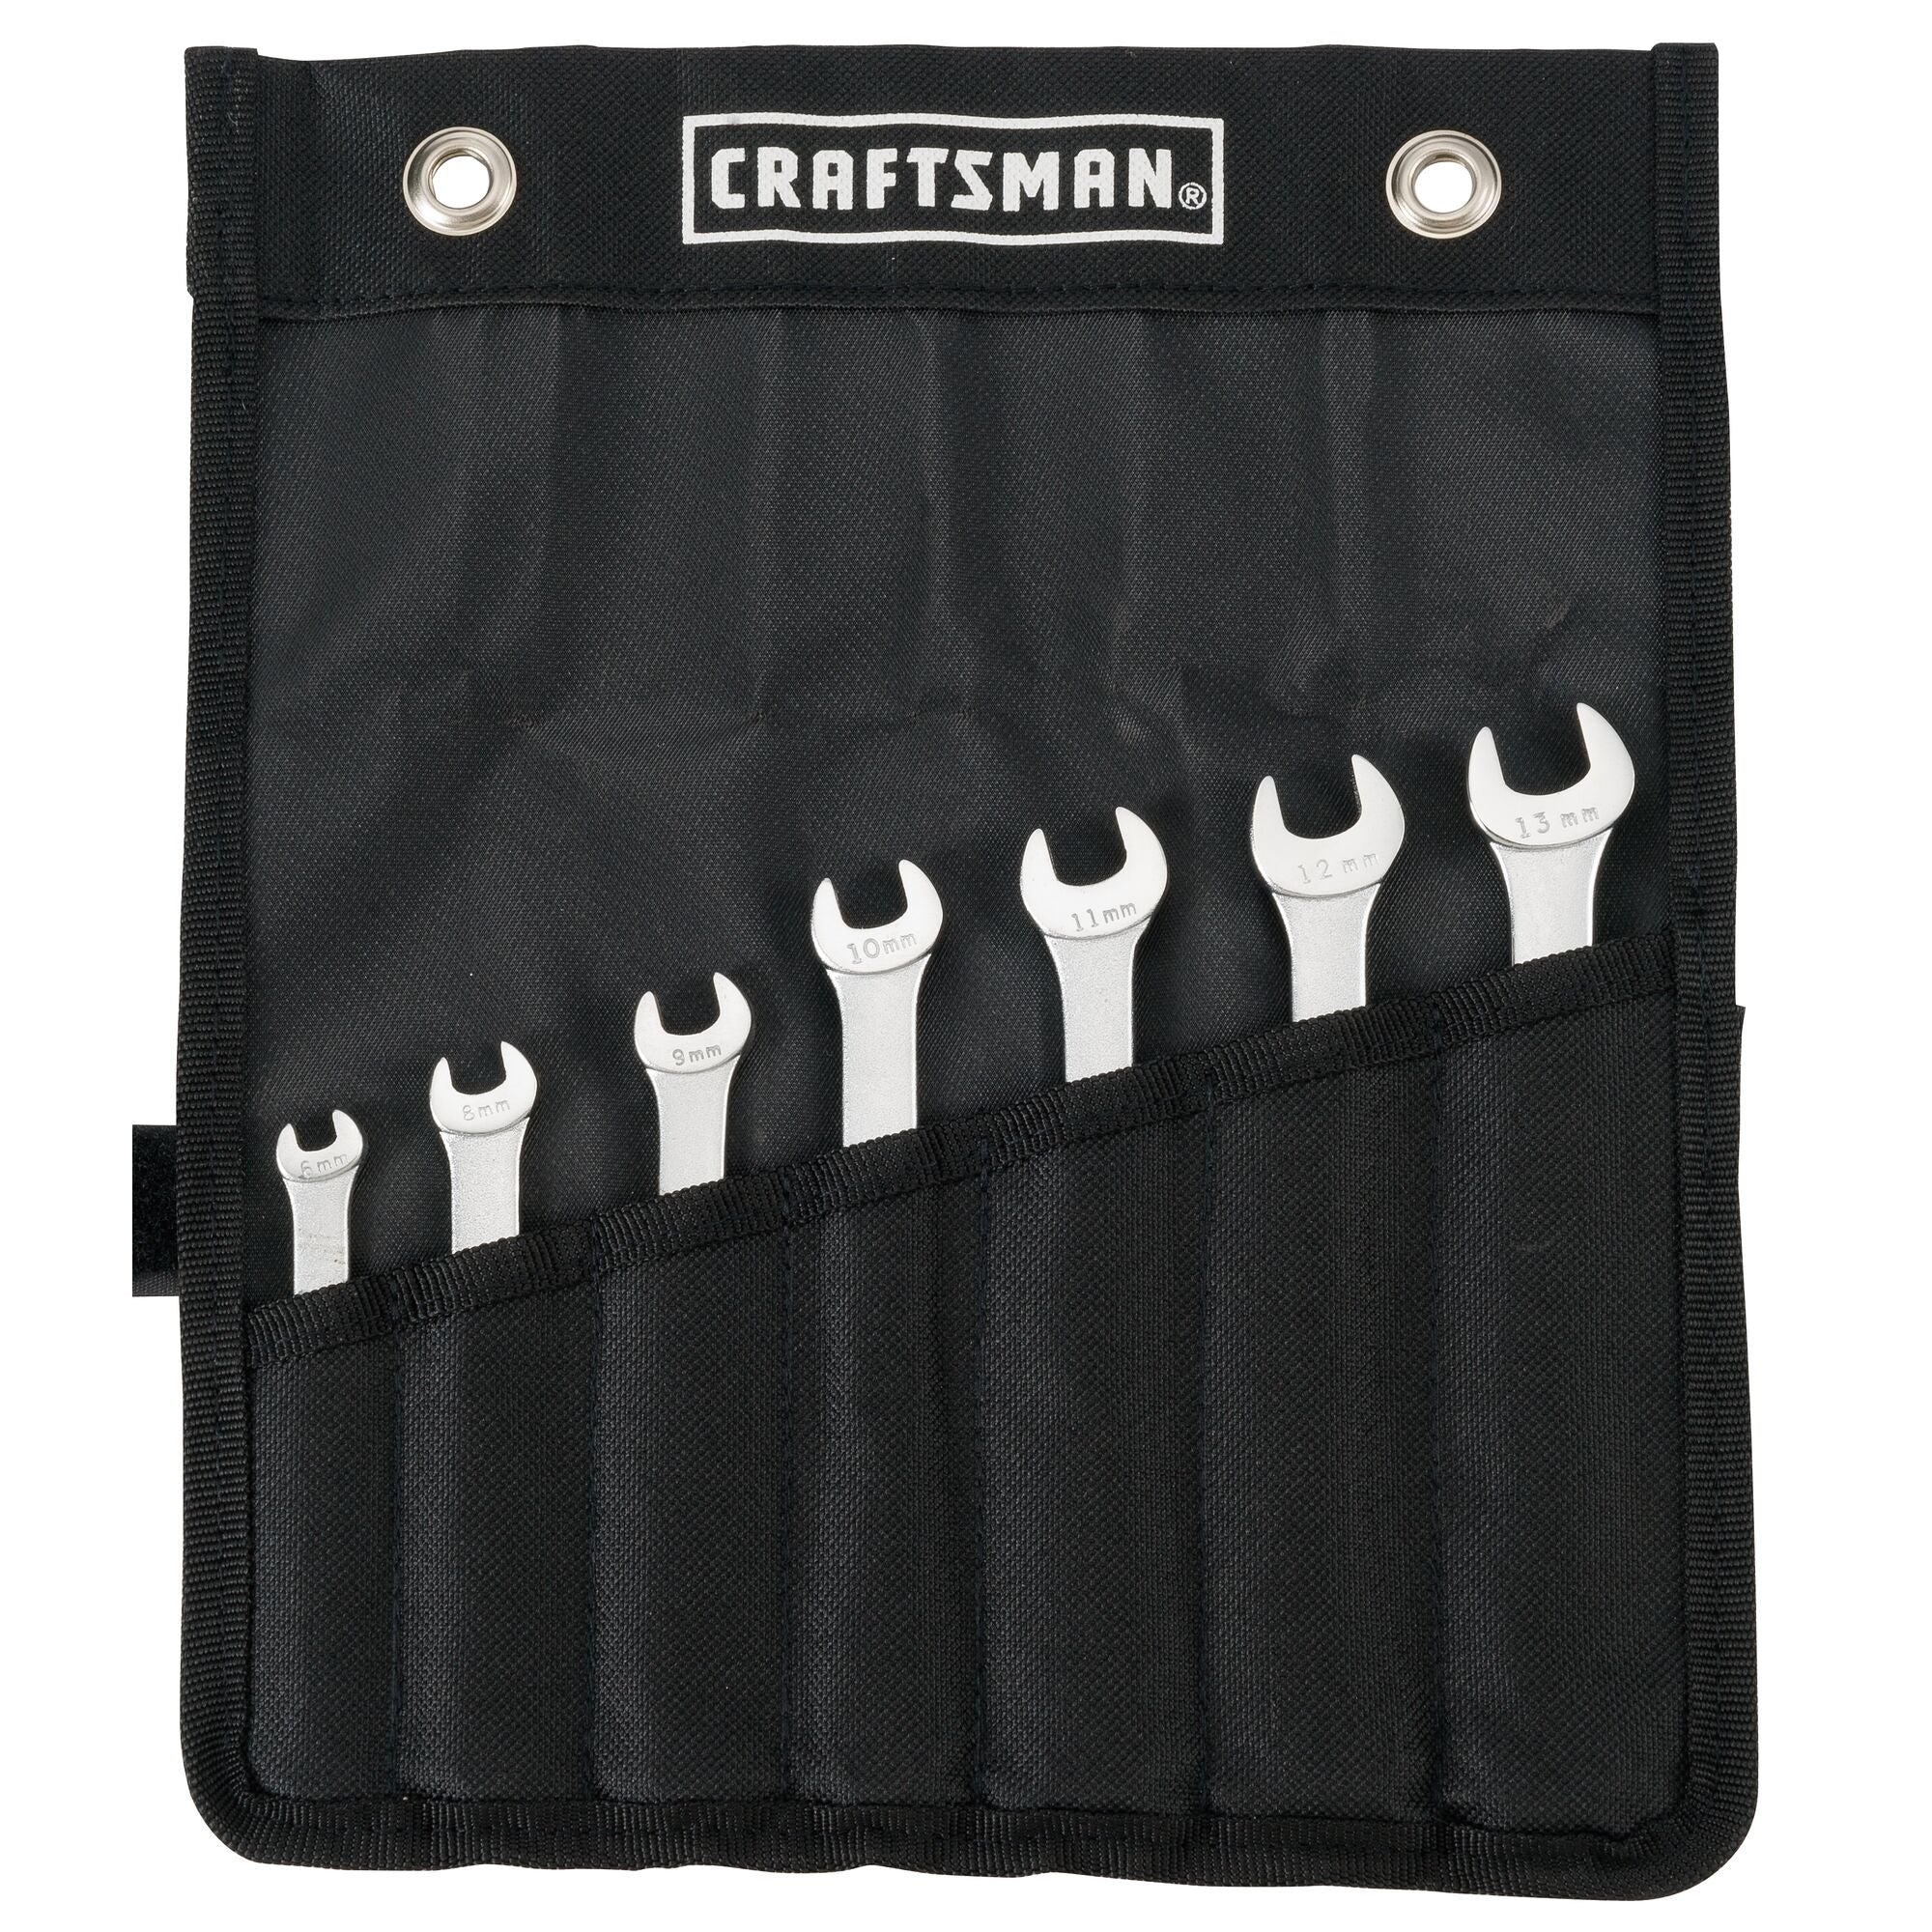 CRAFTSMAN 9-Piece Set 12-point Metric Standard Combination Wrench